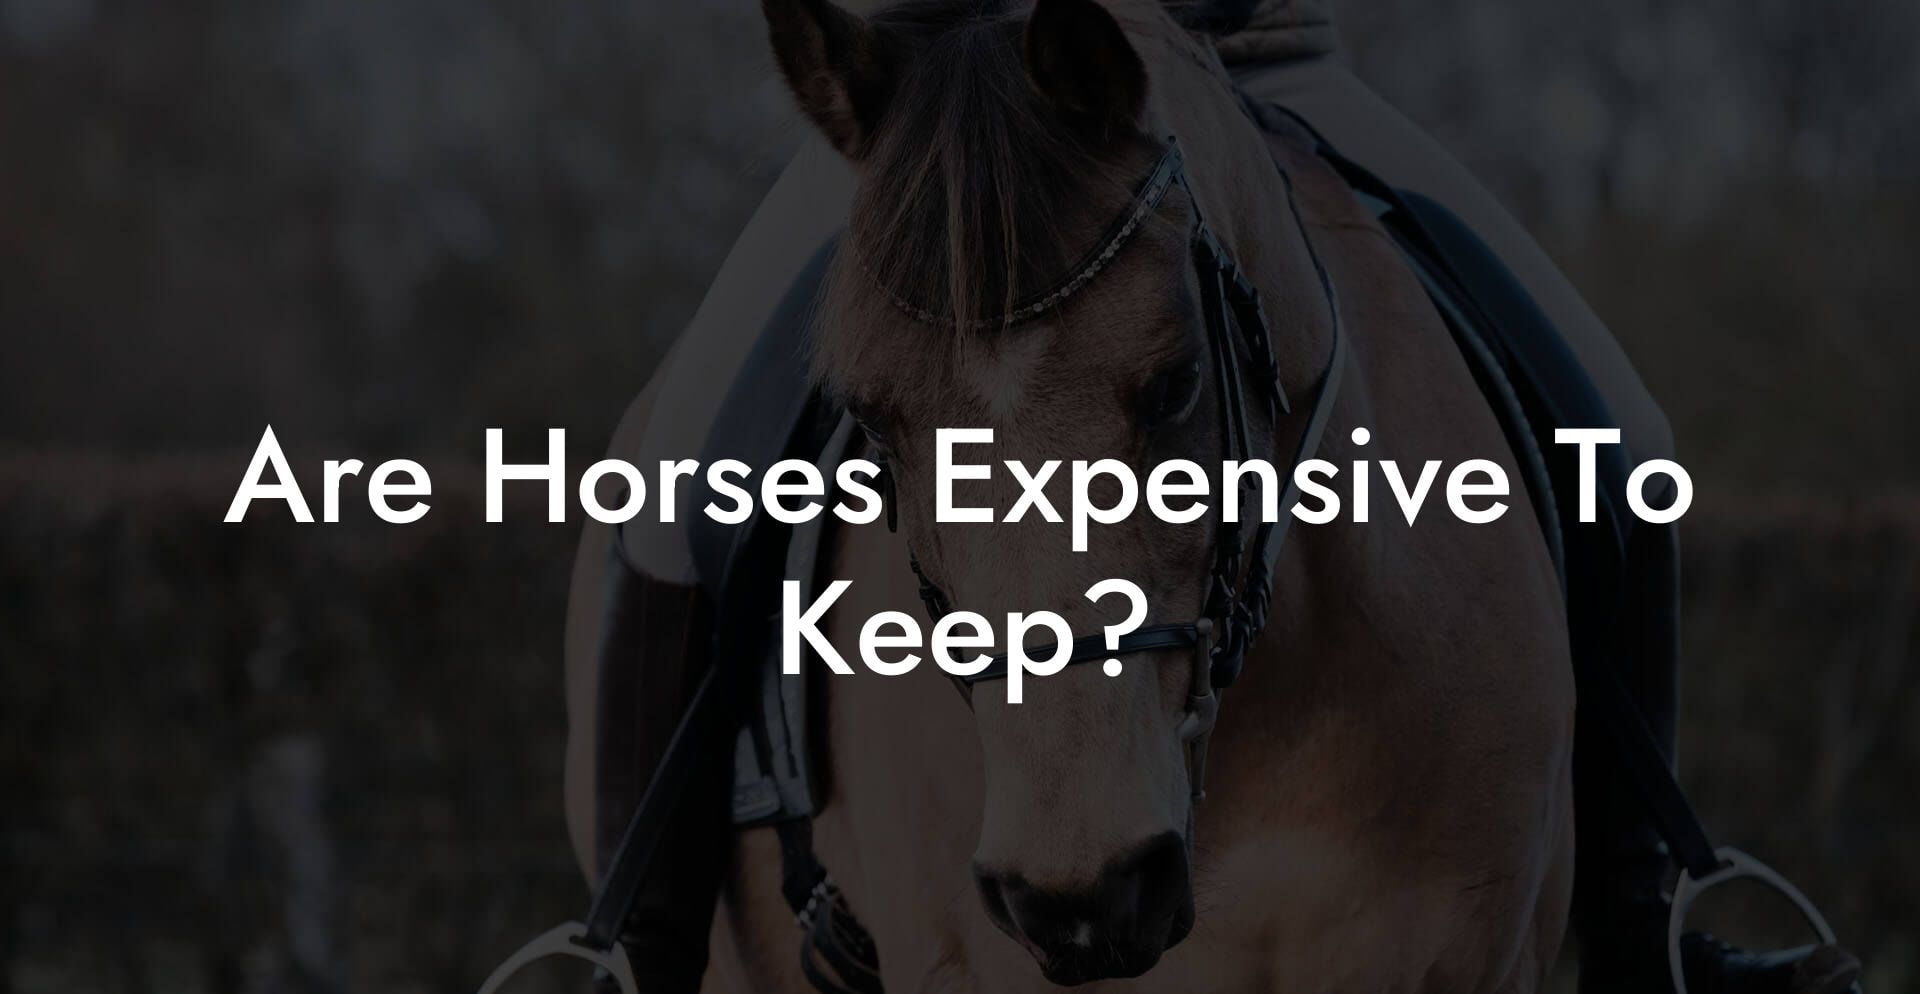 Are Horses Expensive To Keep?